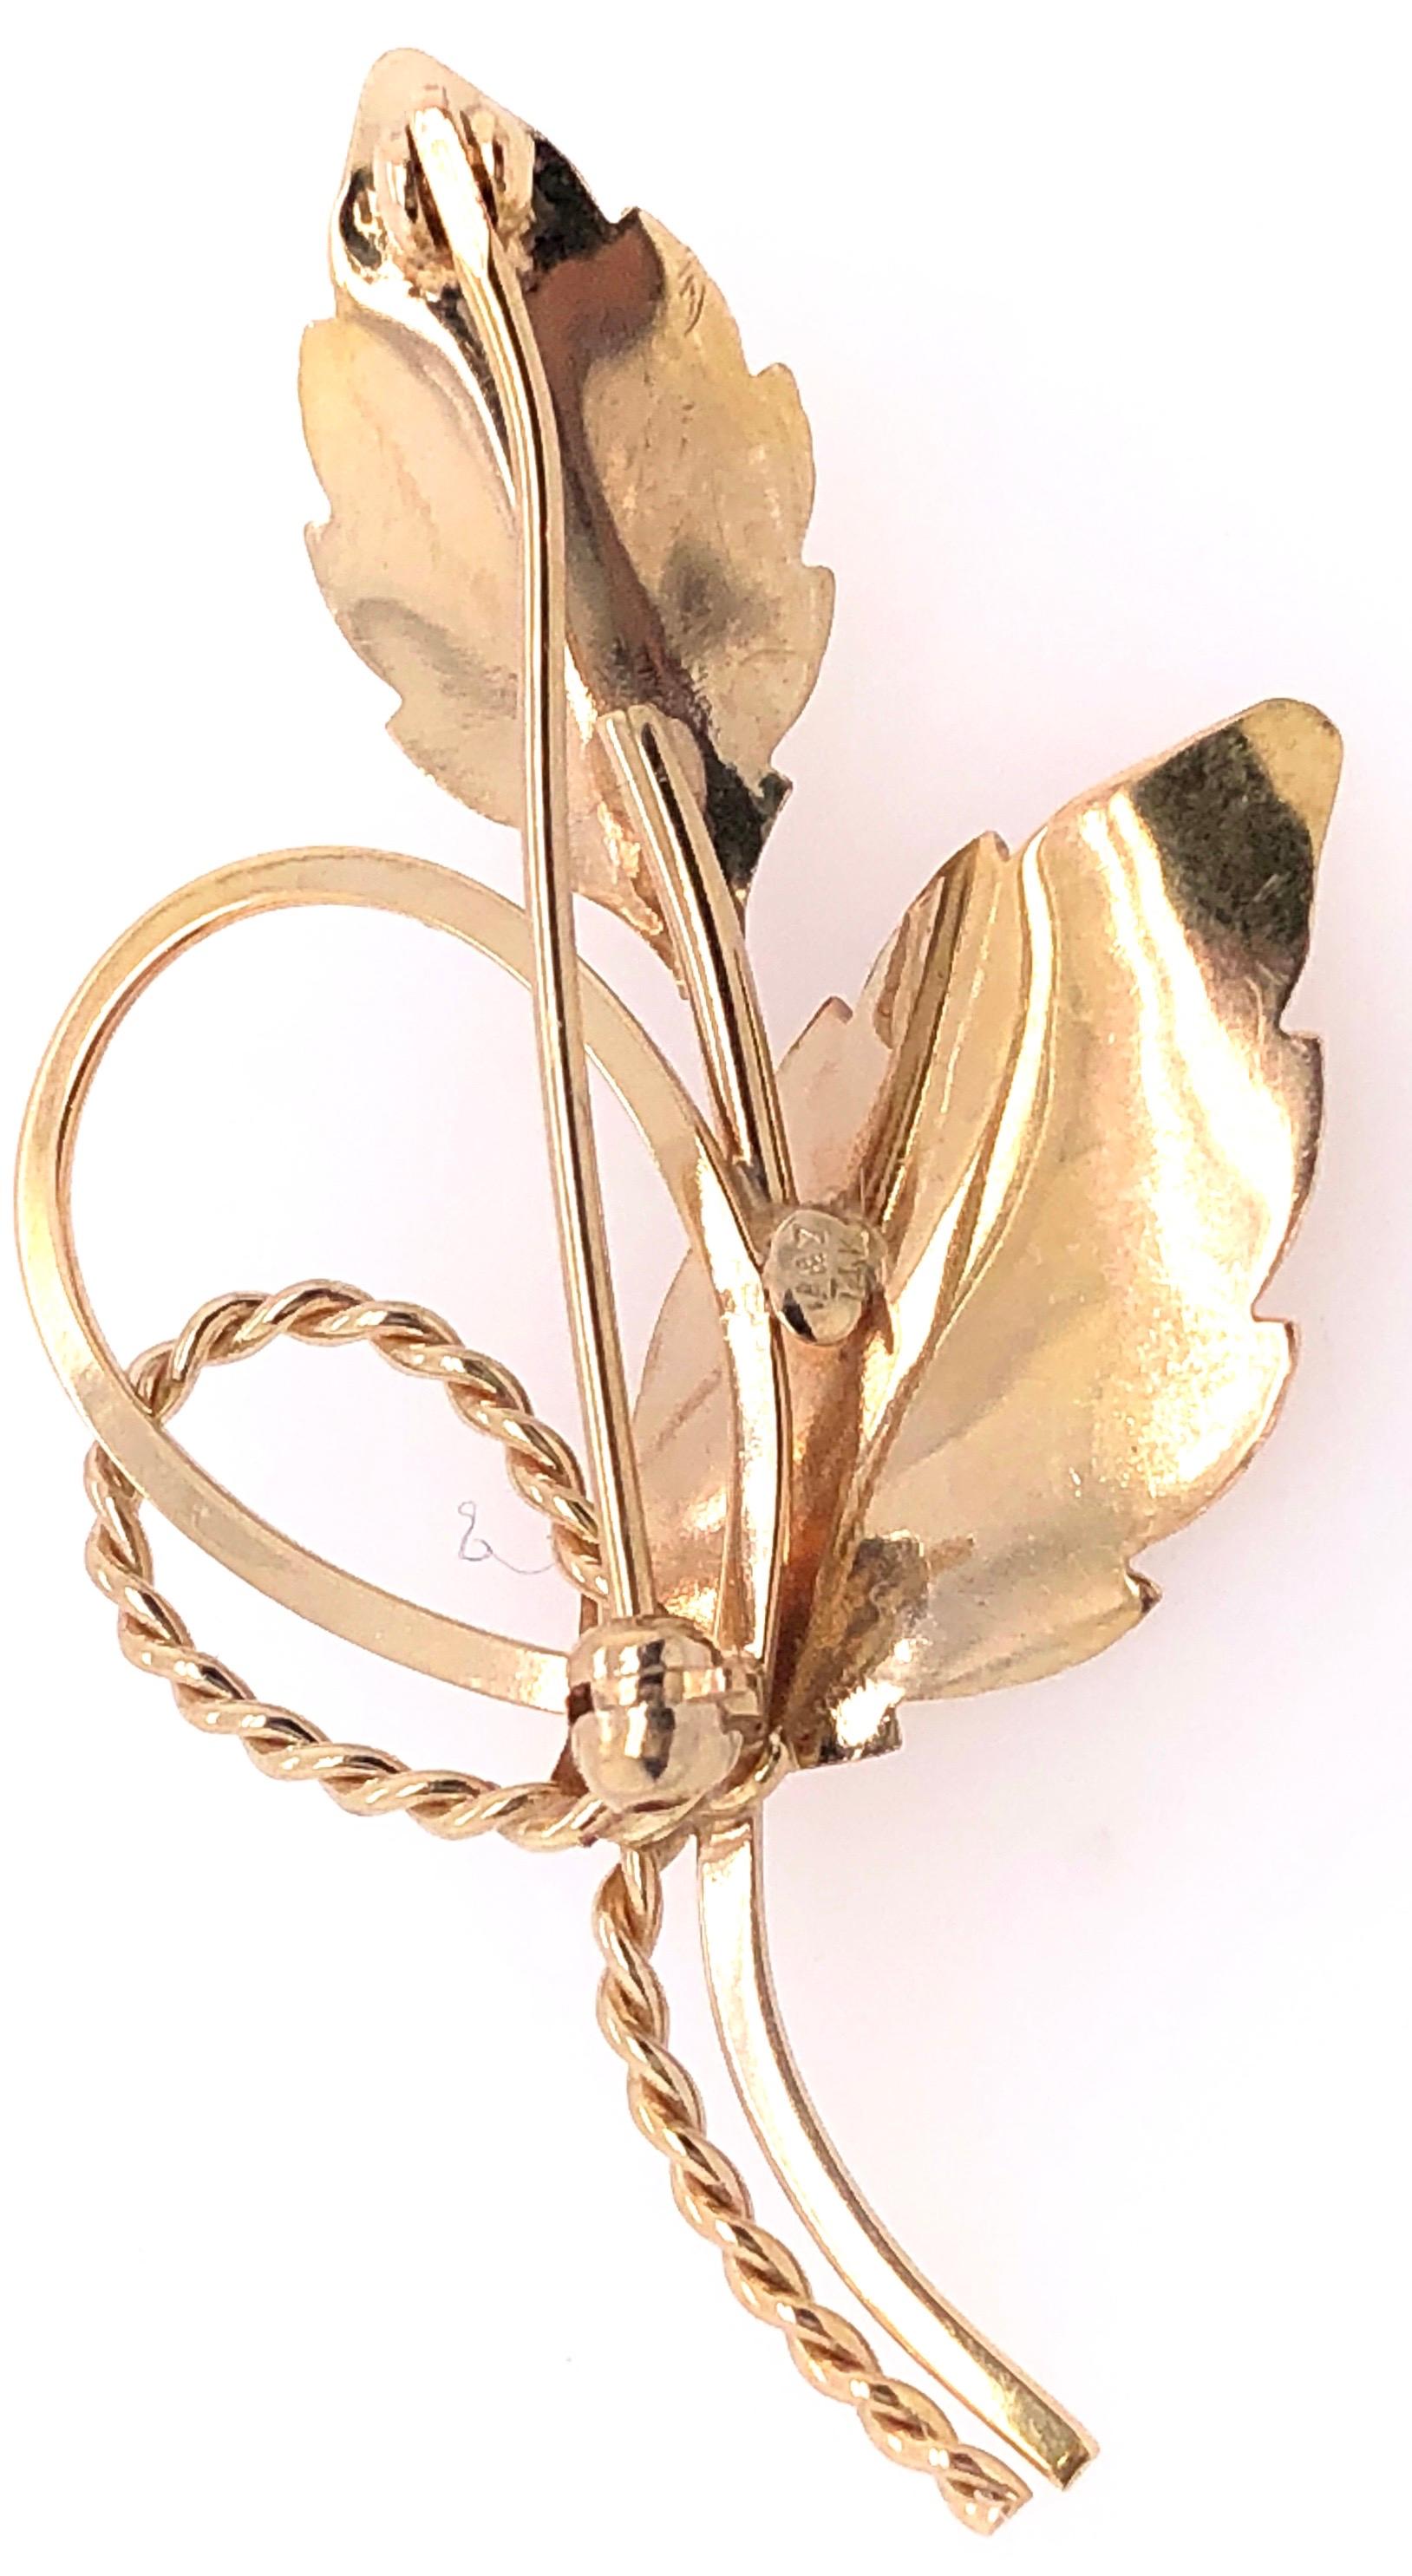 14 Karat Yellow Gold Free Form Leaf Brooch / Pin
3.60 grams total weight.
